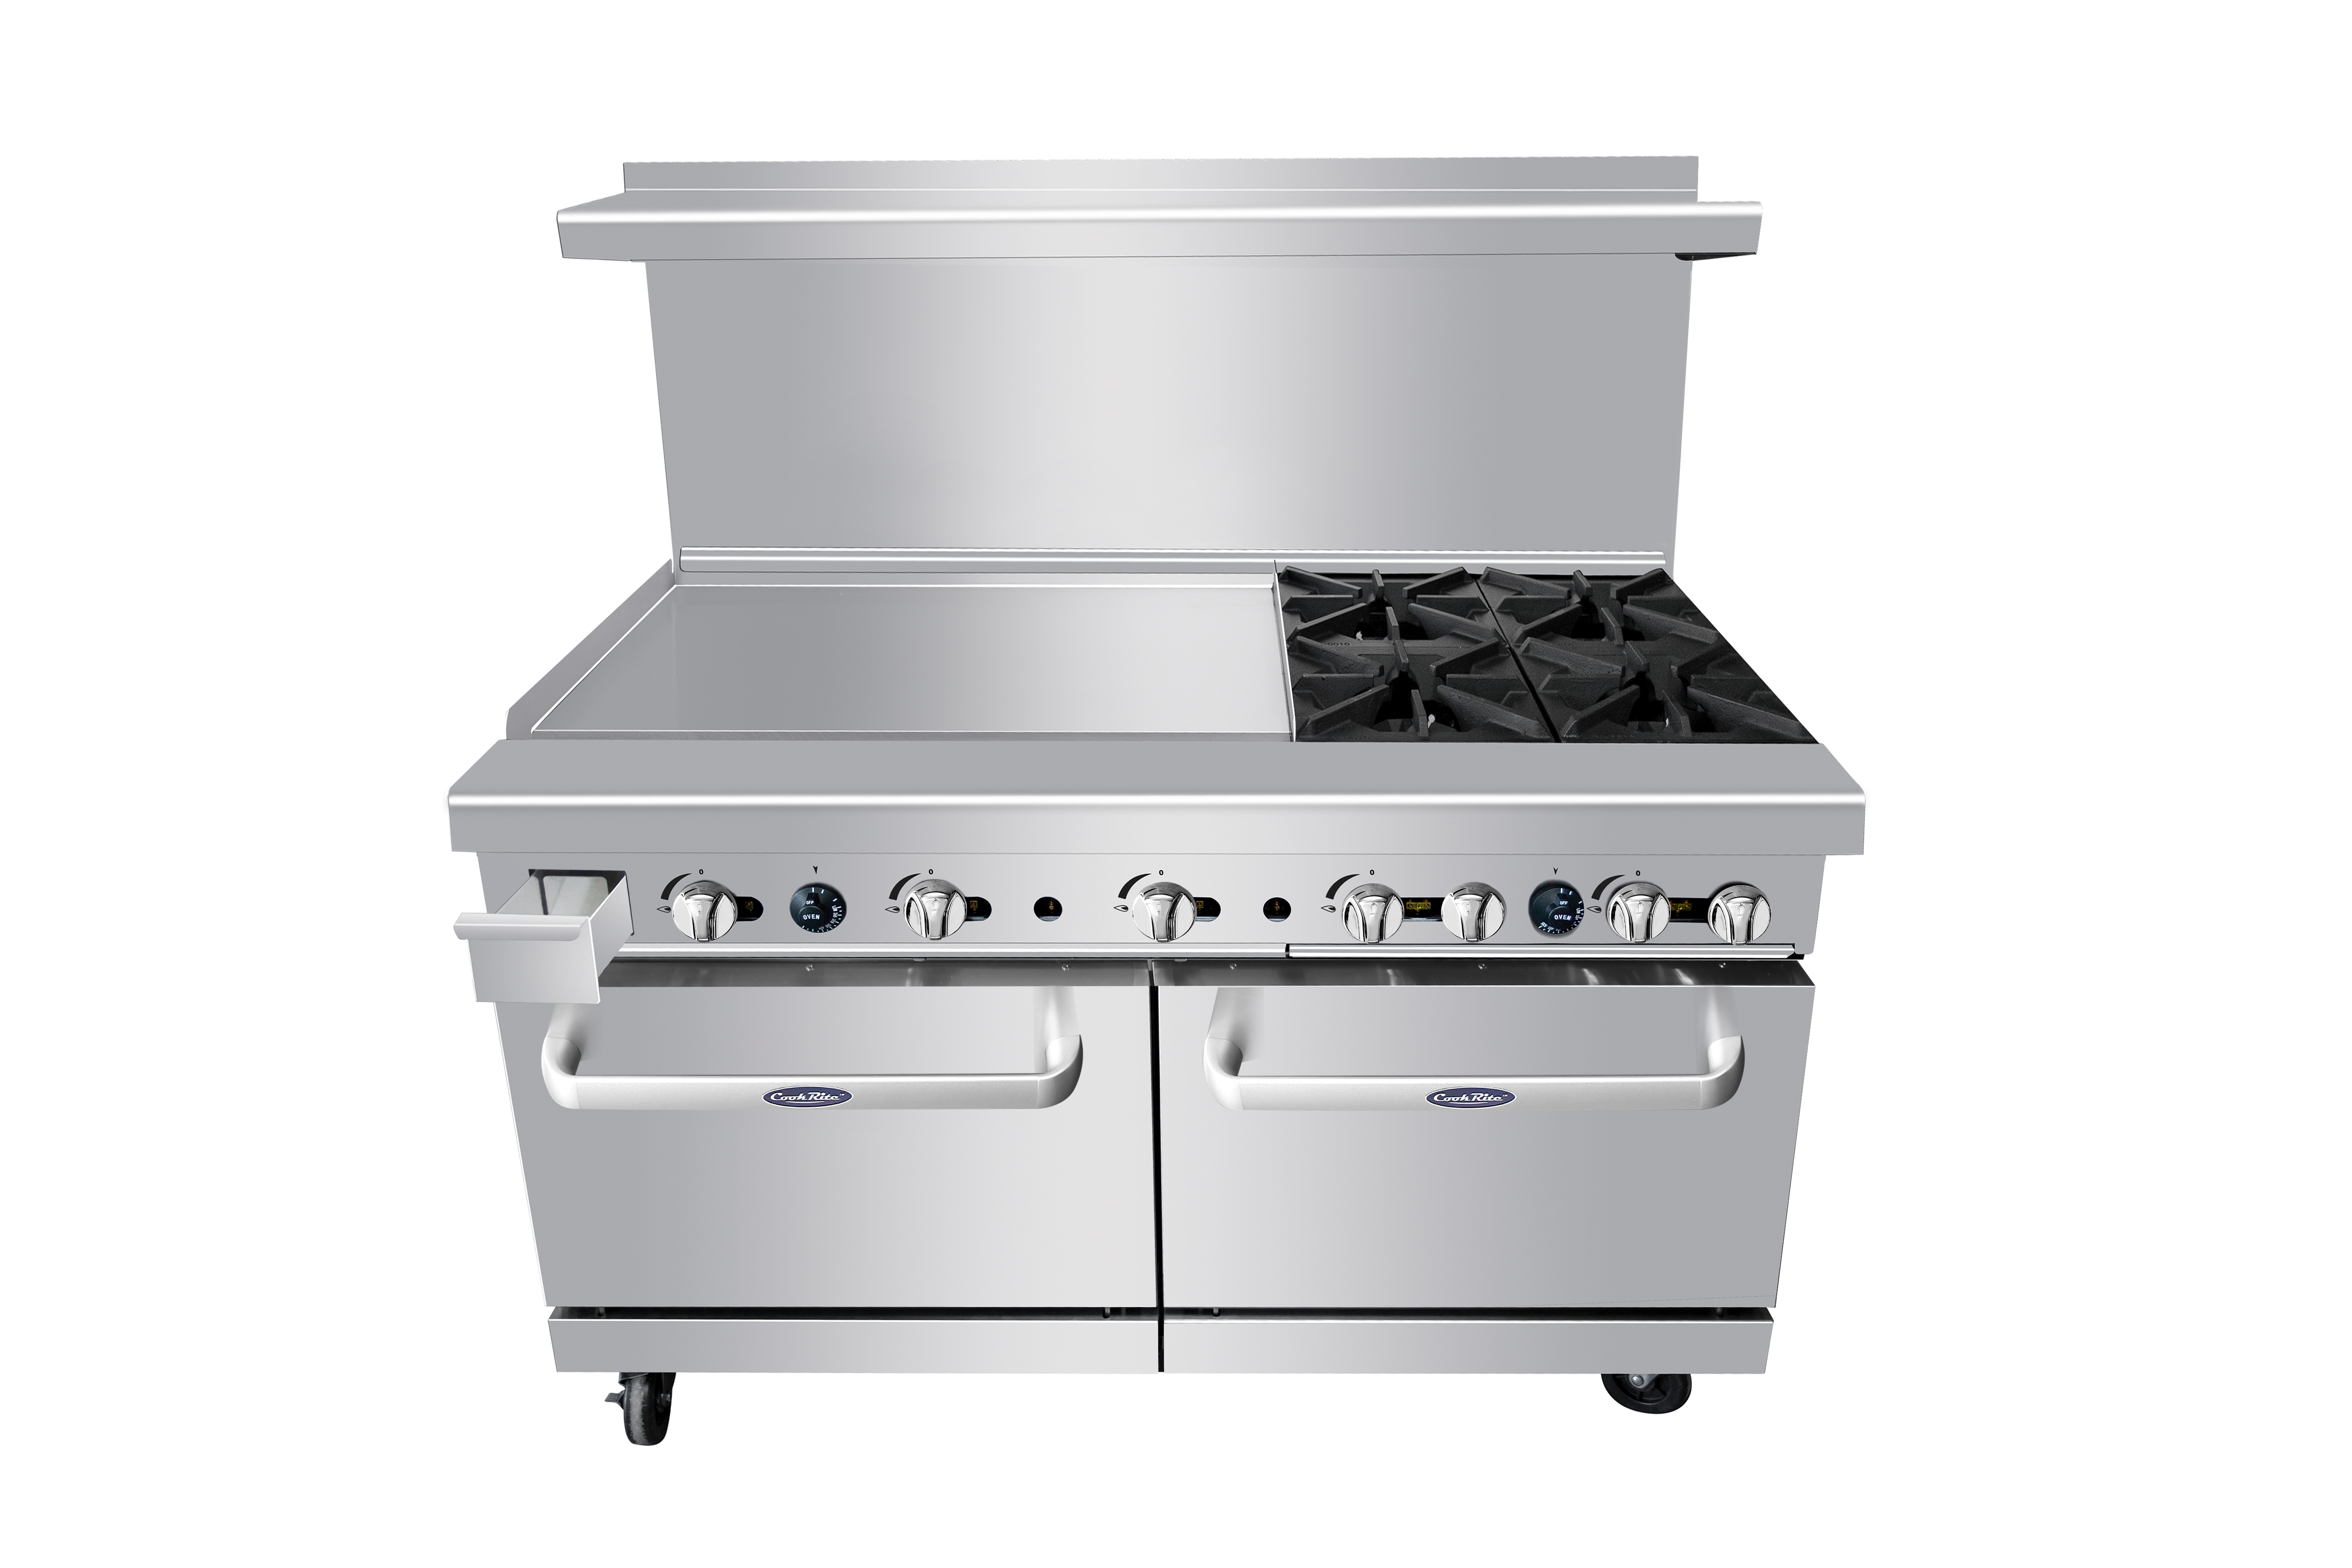 Gas Range with 4 burners and 36 griddle